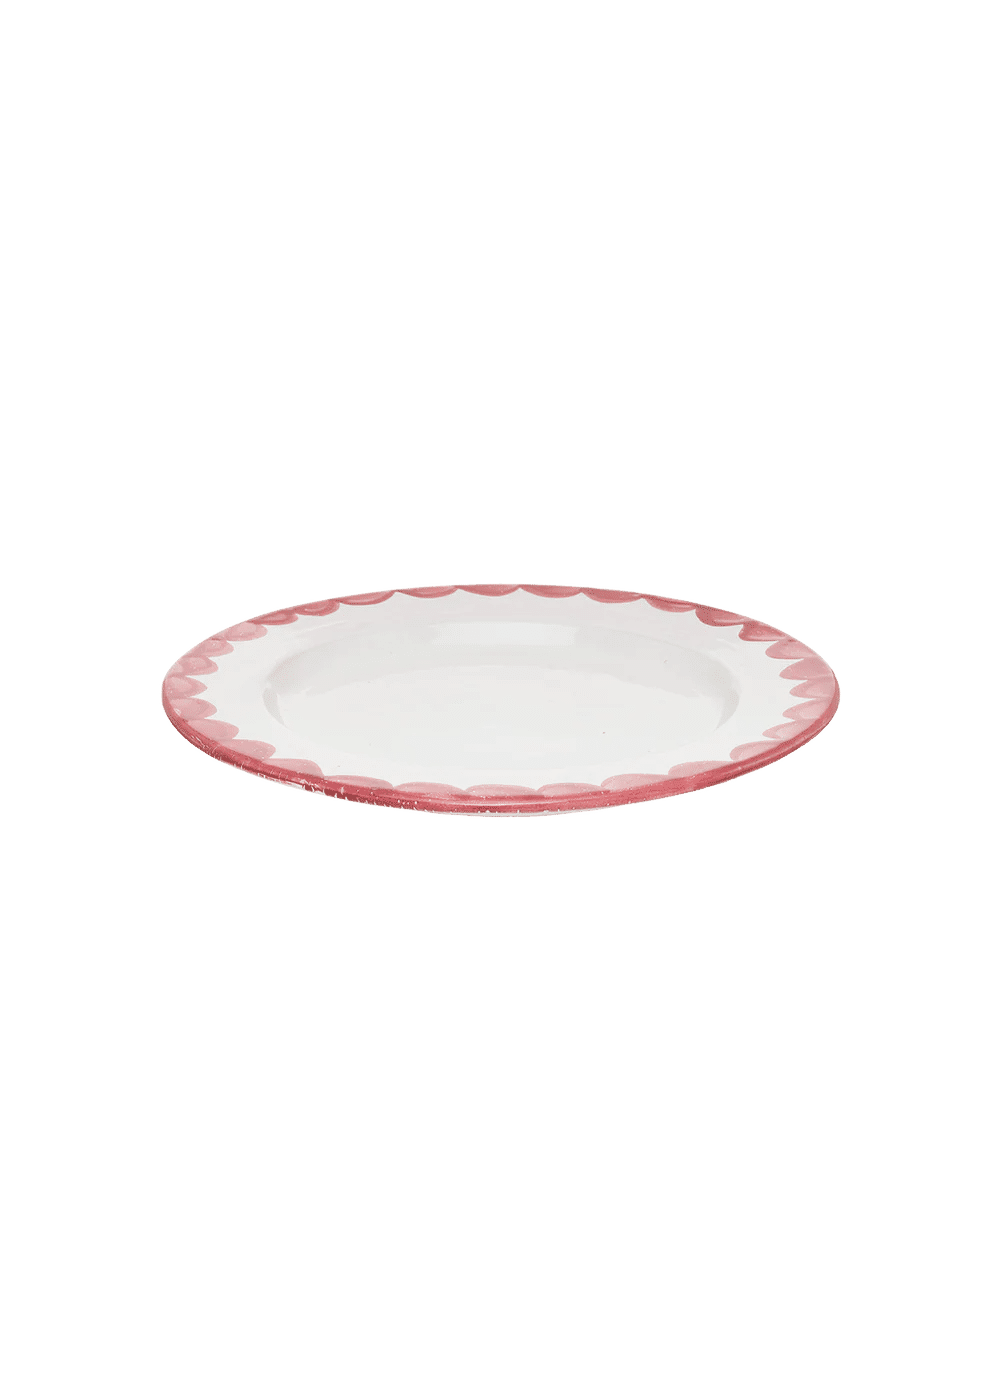 Pink Scallop Dinner Plate, Set of 2